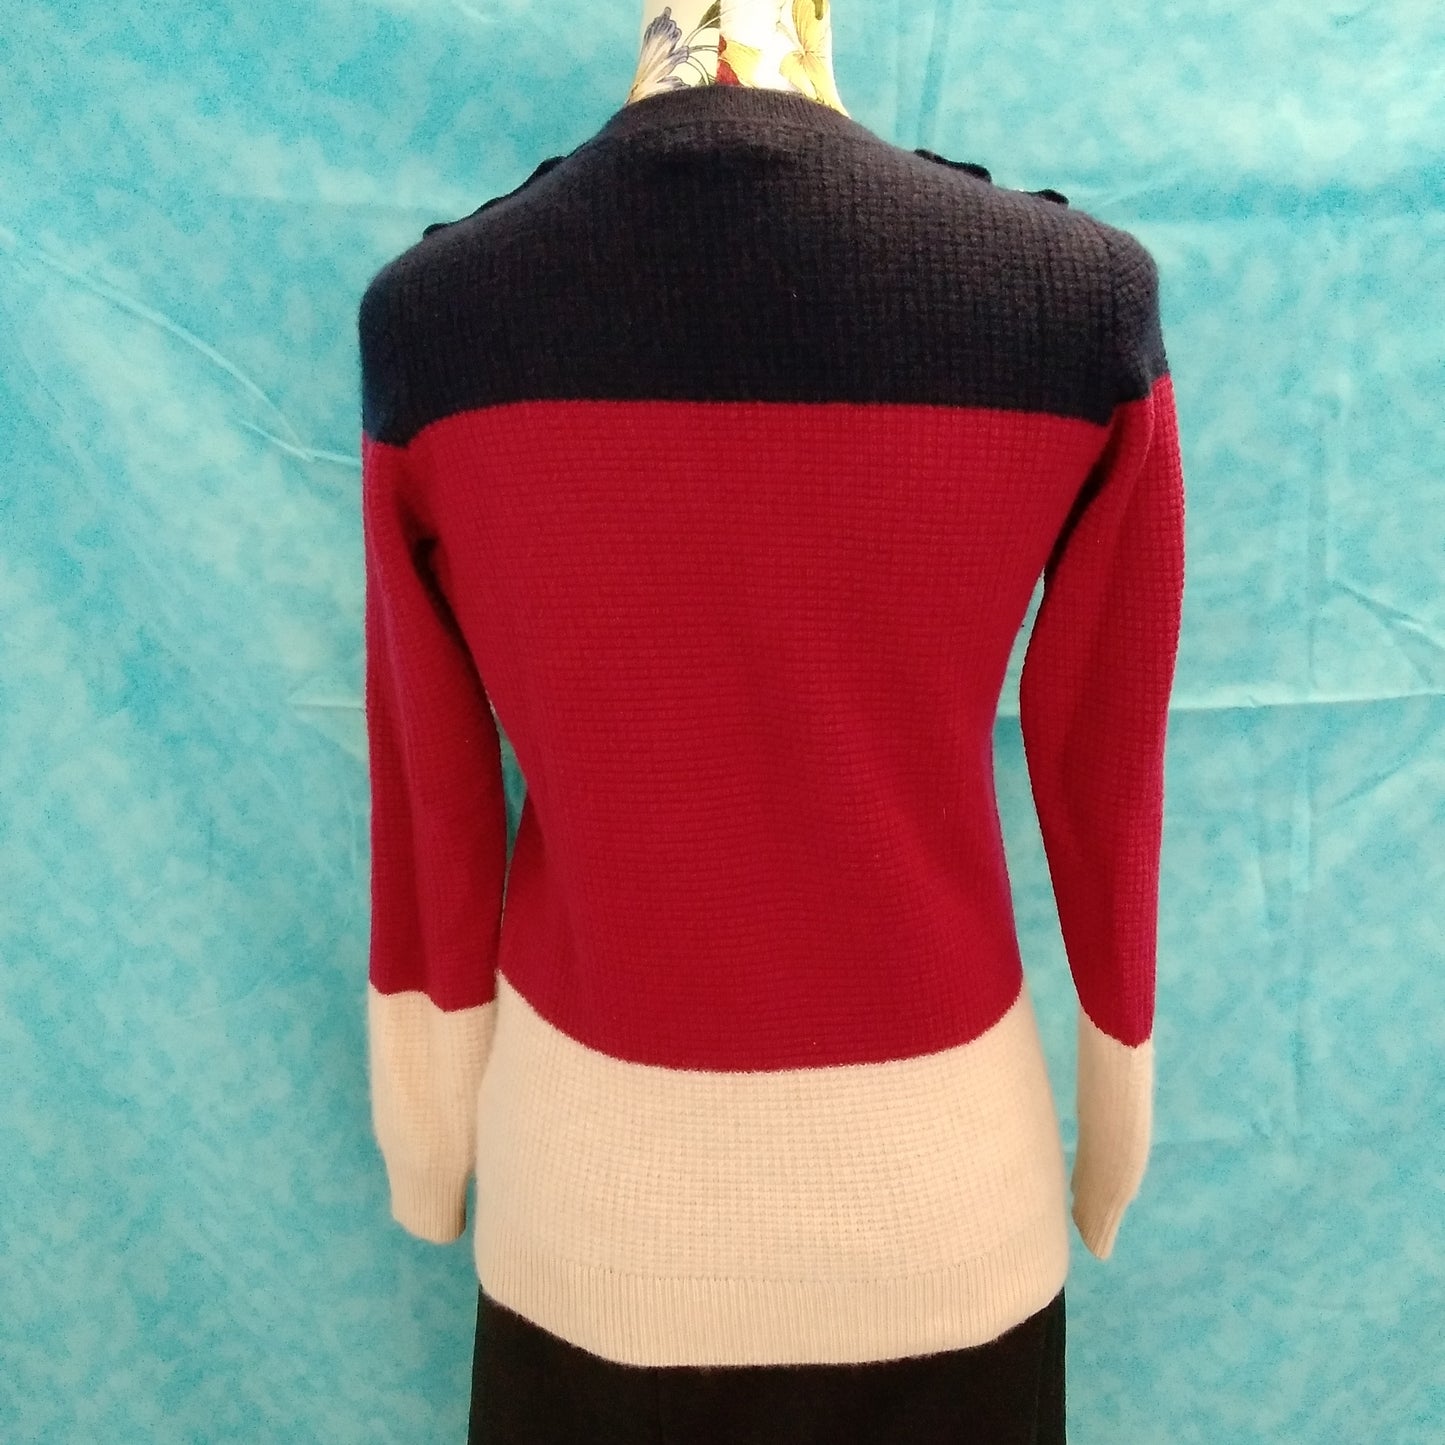 J Crew Collection Women's Cashmere Colorblock Waffle Sweater - Size: XS